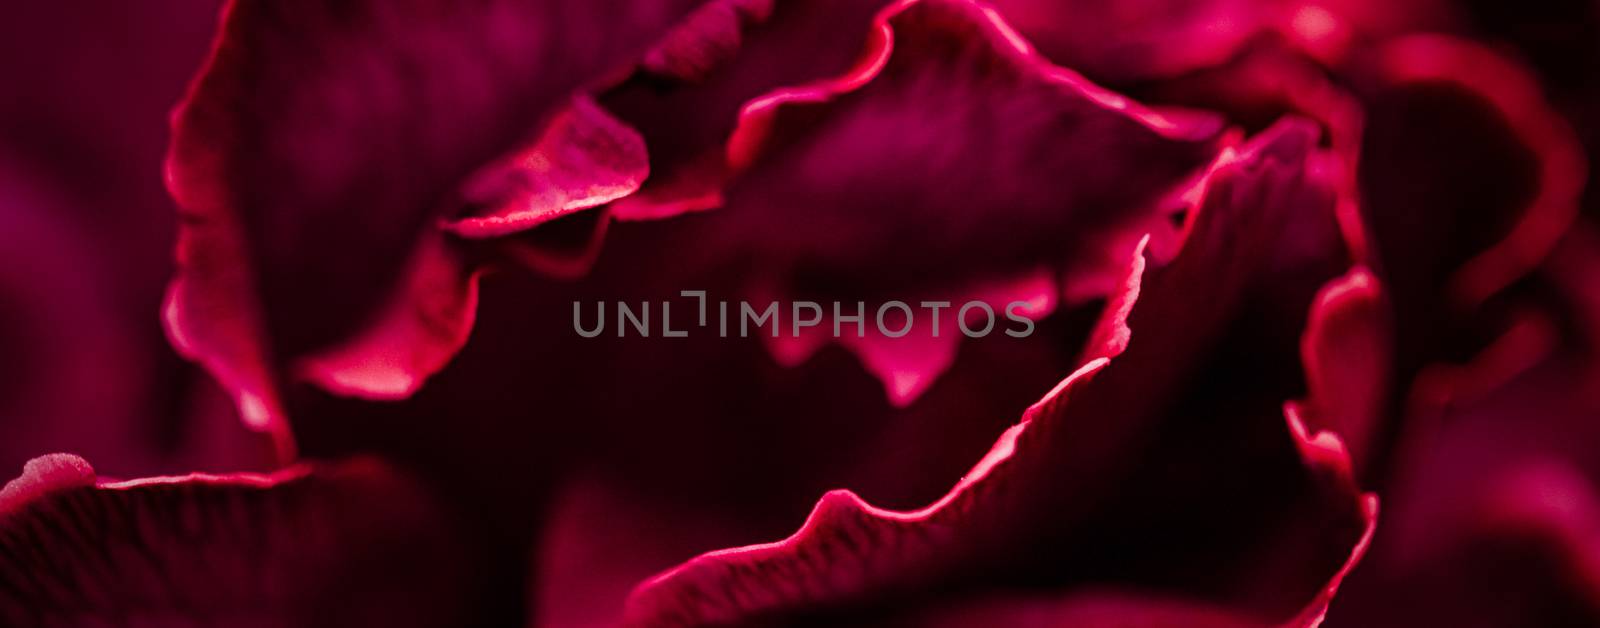 Flora, branding and love concept - Red carnation flower in bloom, abstract floral blossom art background, flowers in spring nature for perfume scent, wedding, luxury beauty brand holiday design